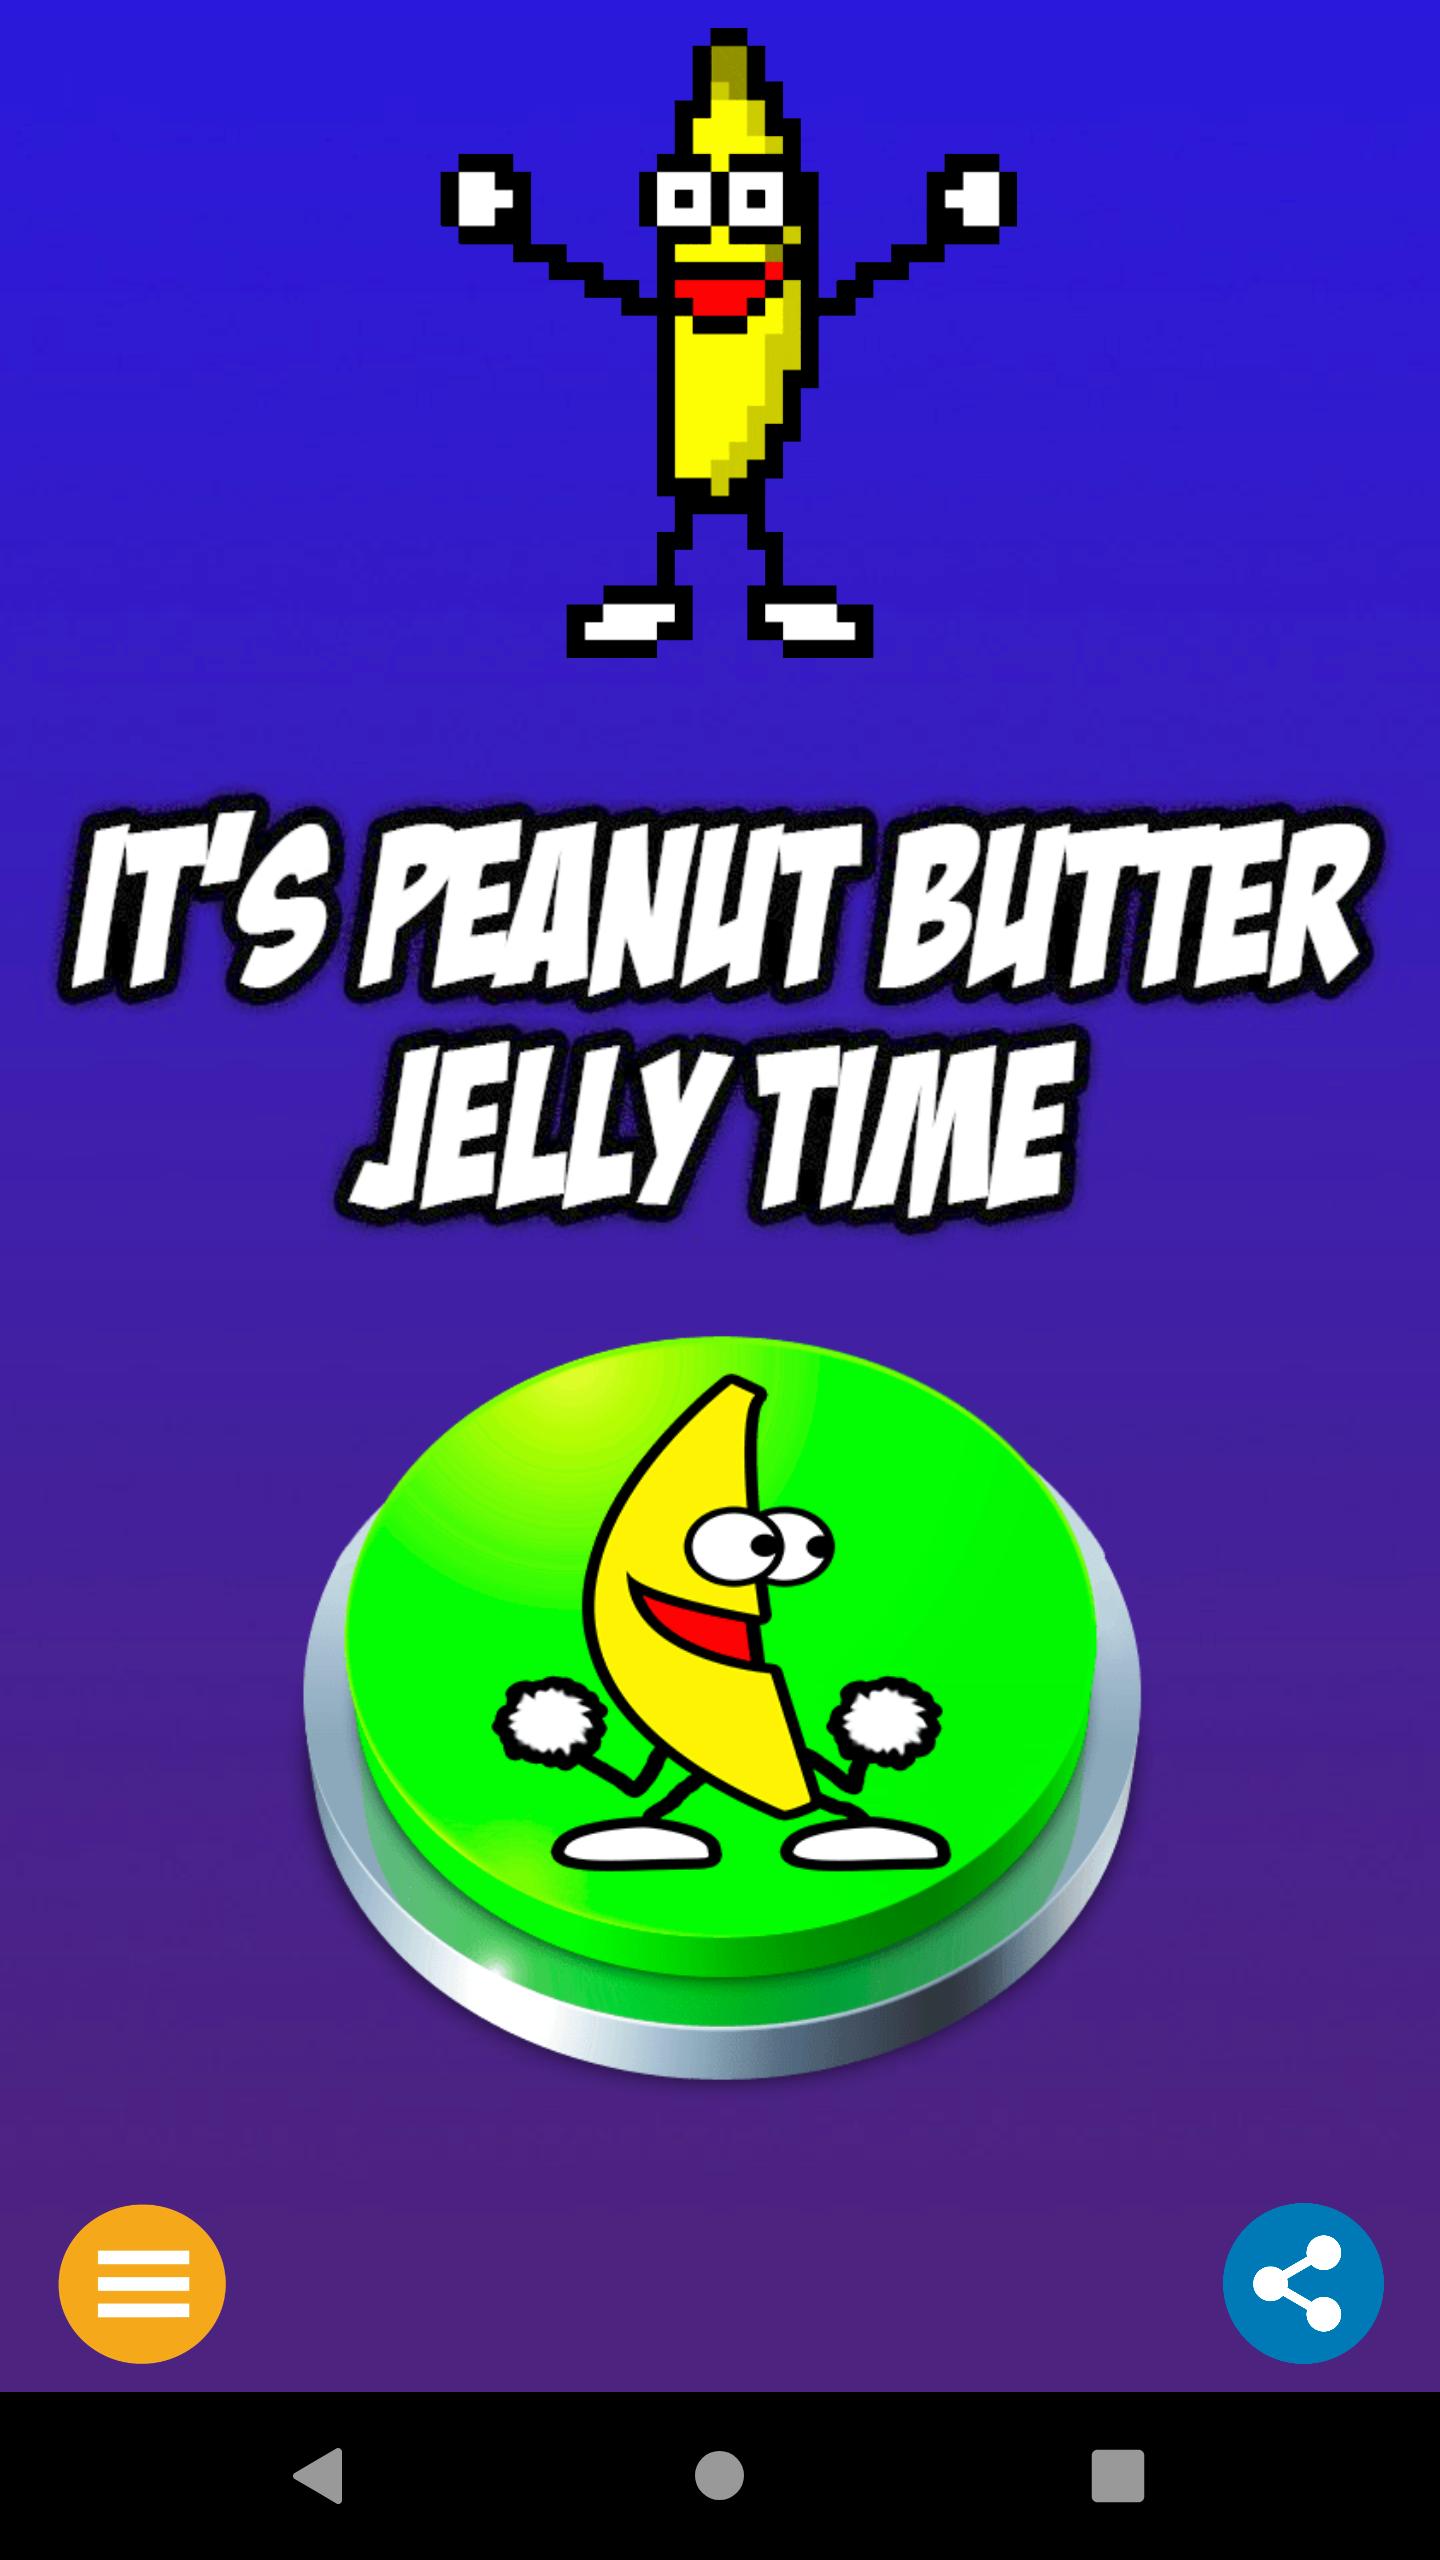 Jelly time